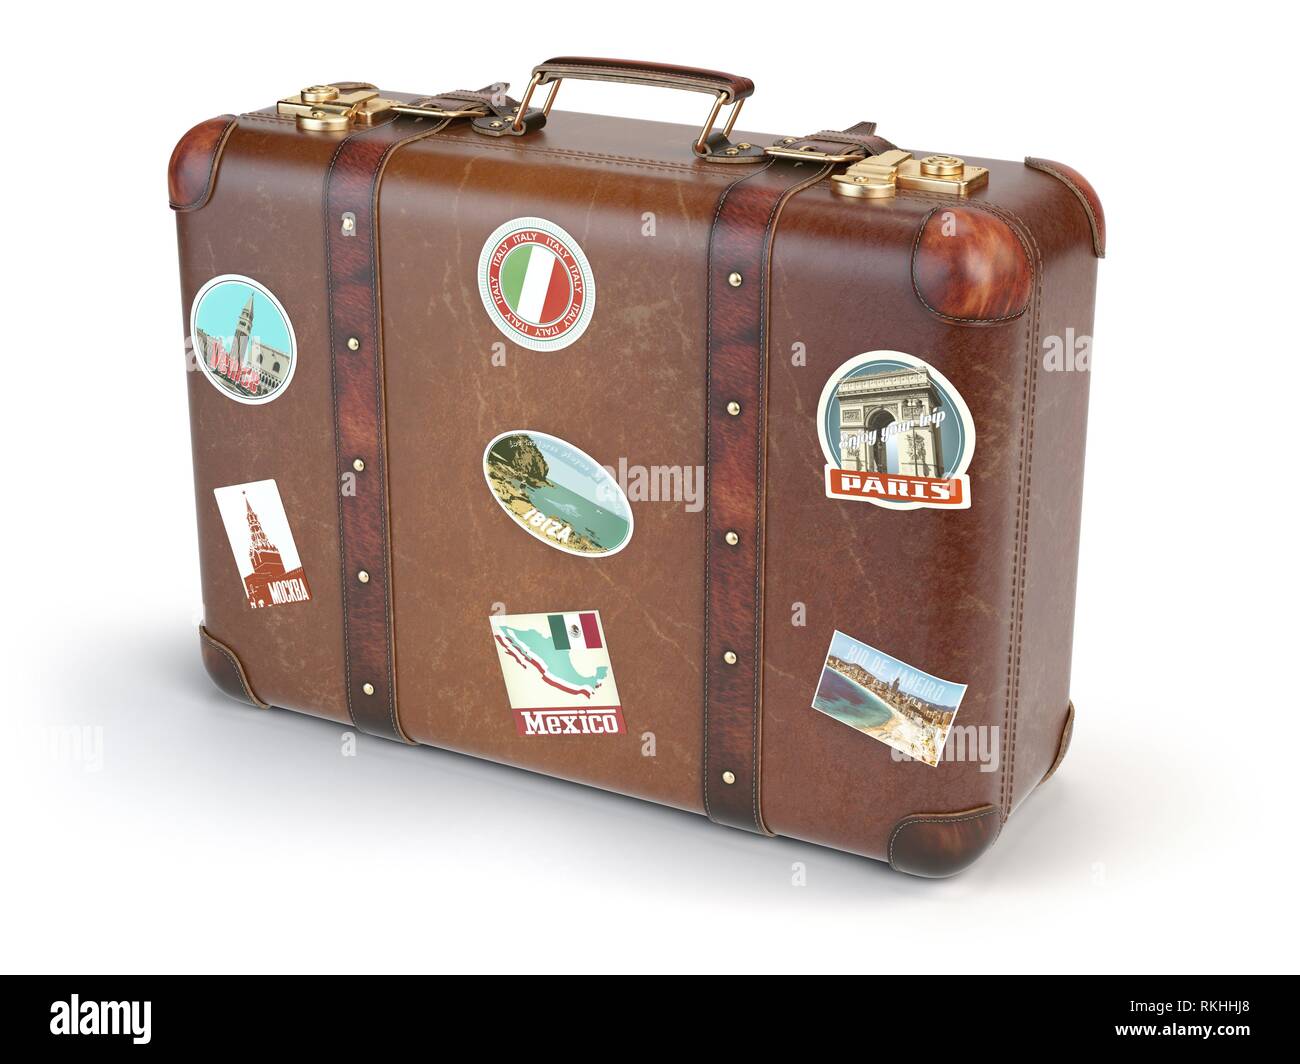 10,789 Vintage Luggage Stickers Images, Stock Photos, 3D objects, & Vectors